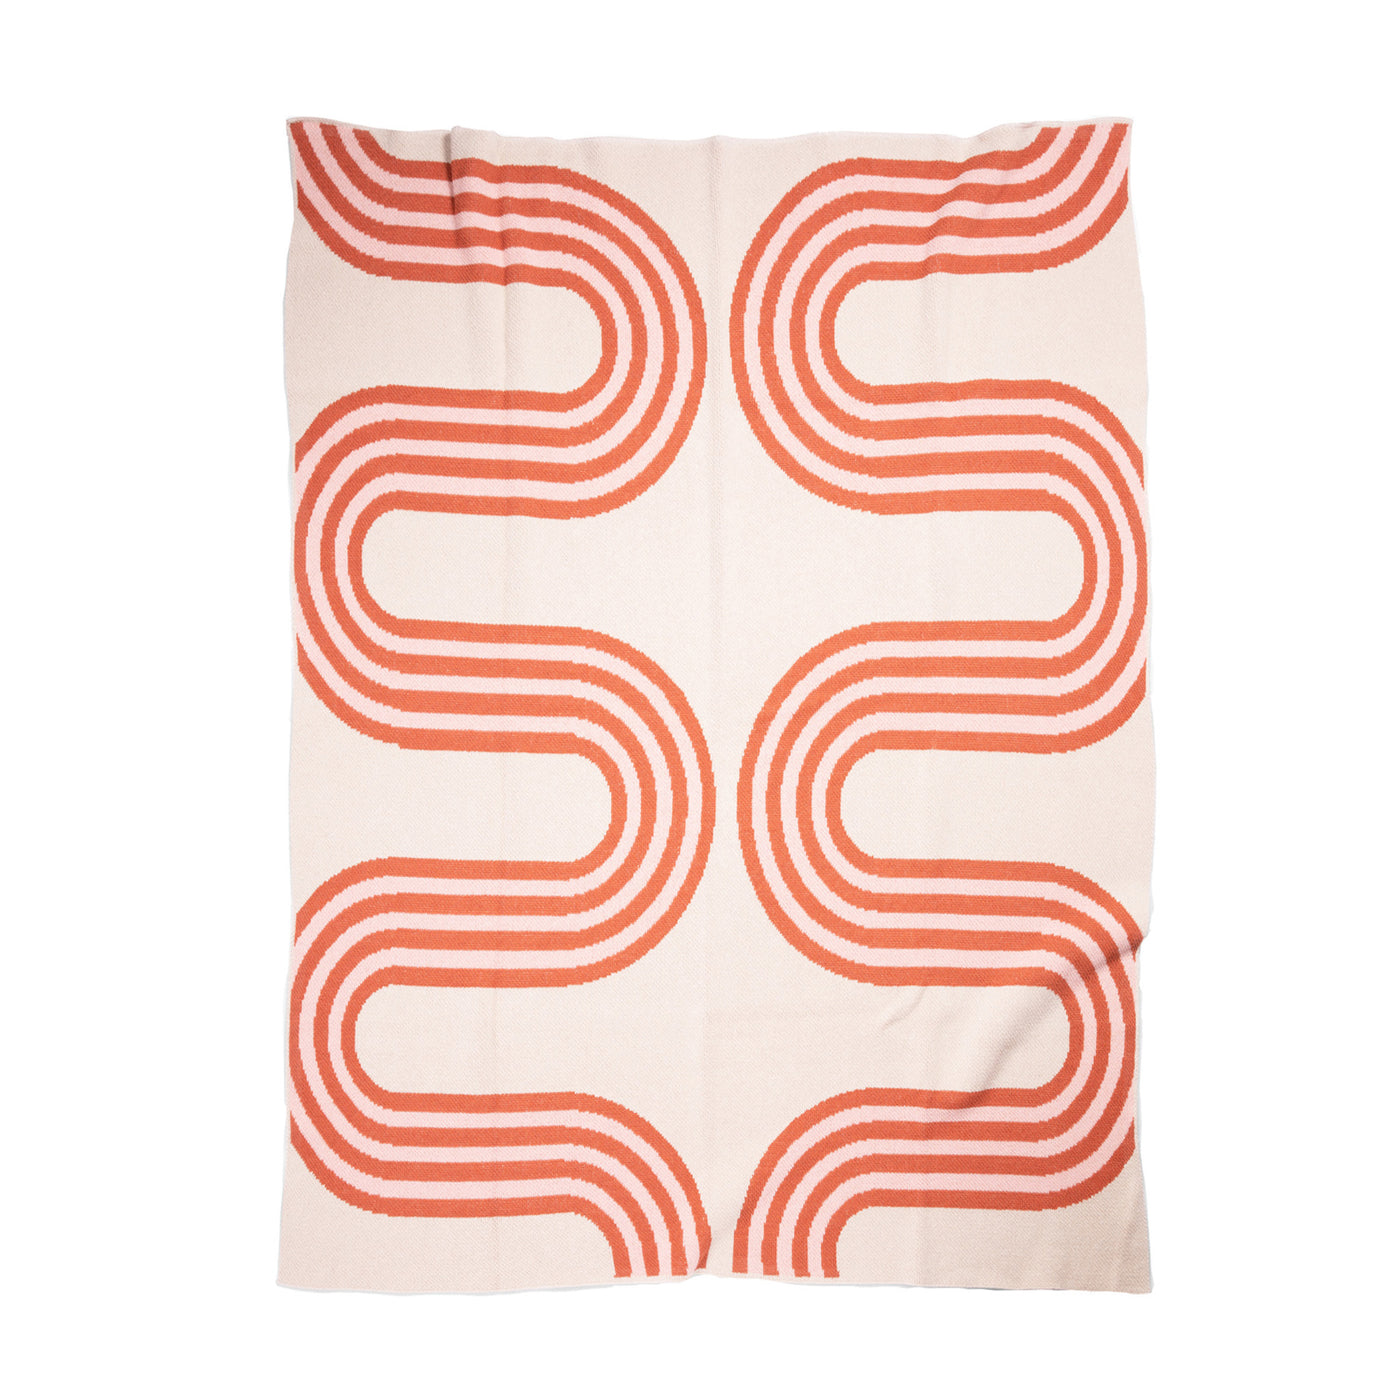 Big Wavy Lines Throw in Pink and Orange